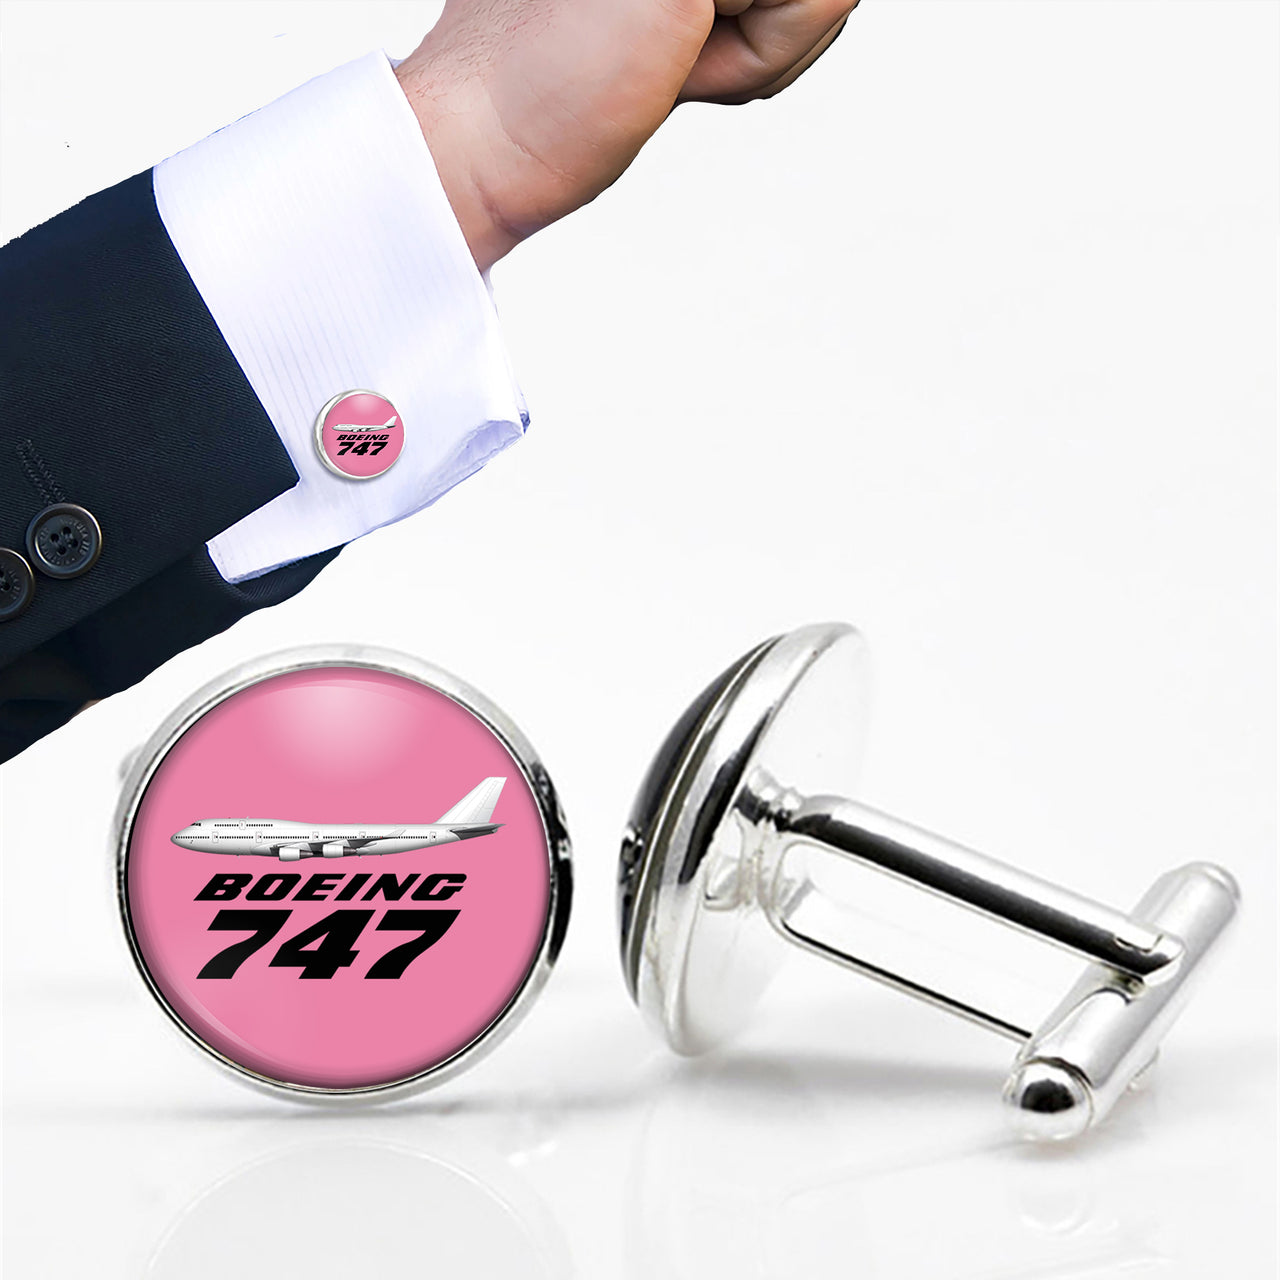 The Boeing 747 Designed Cuff Links